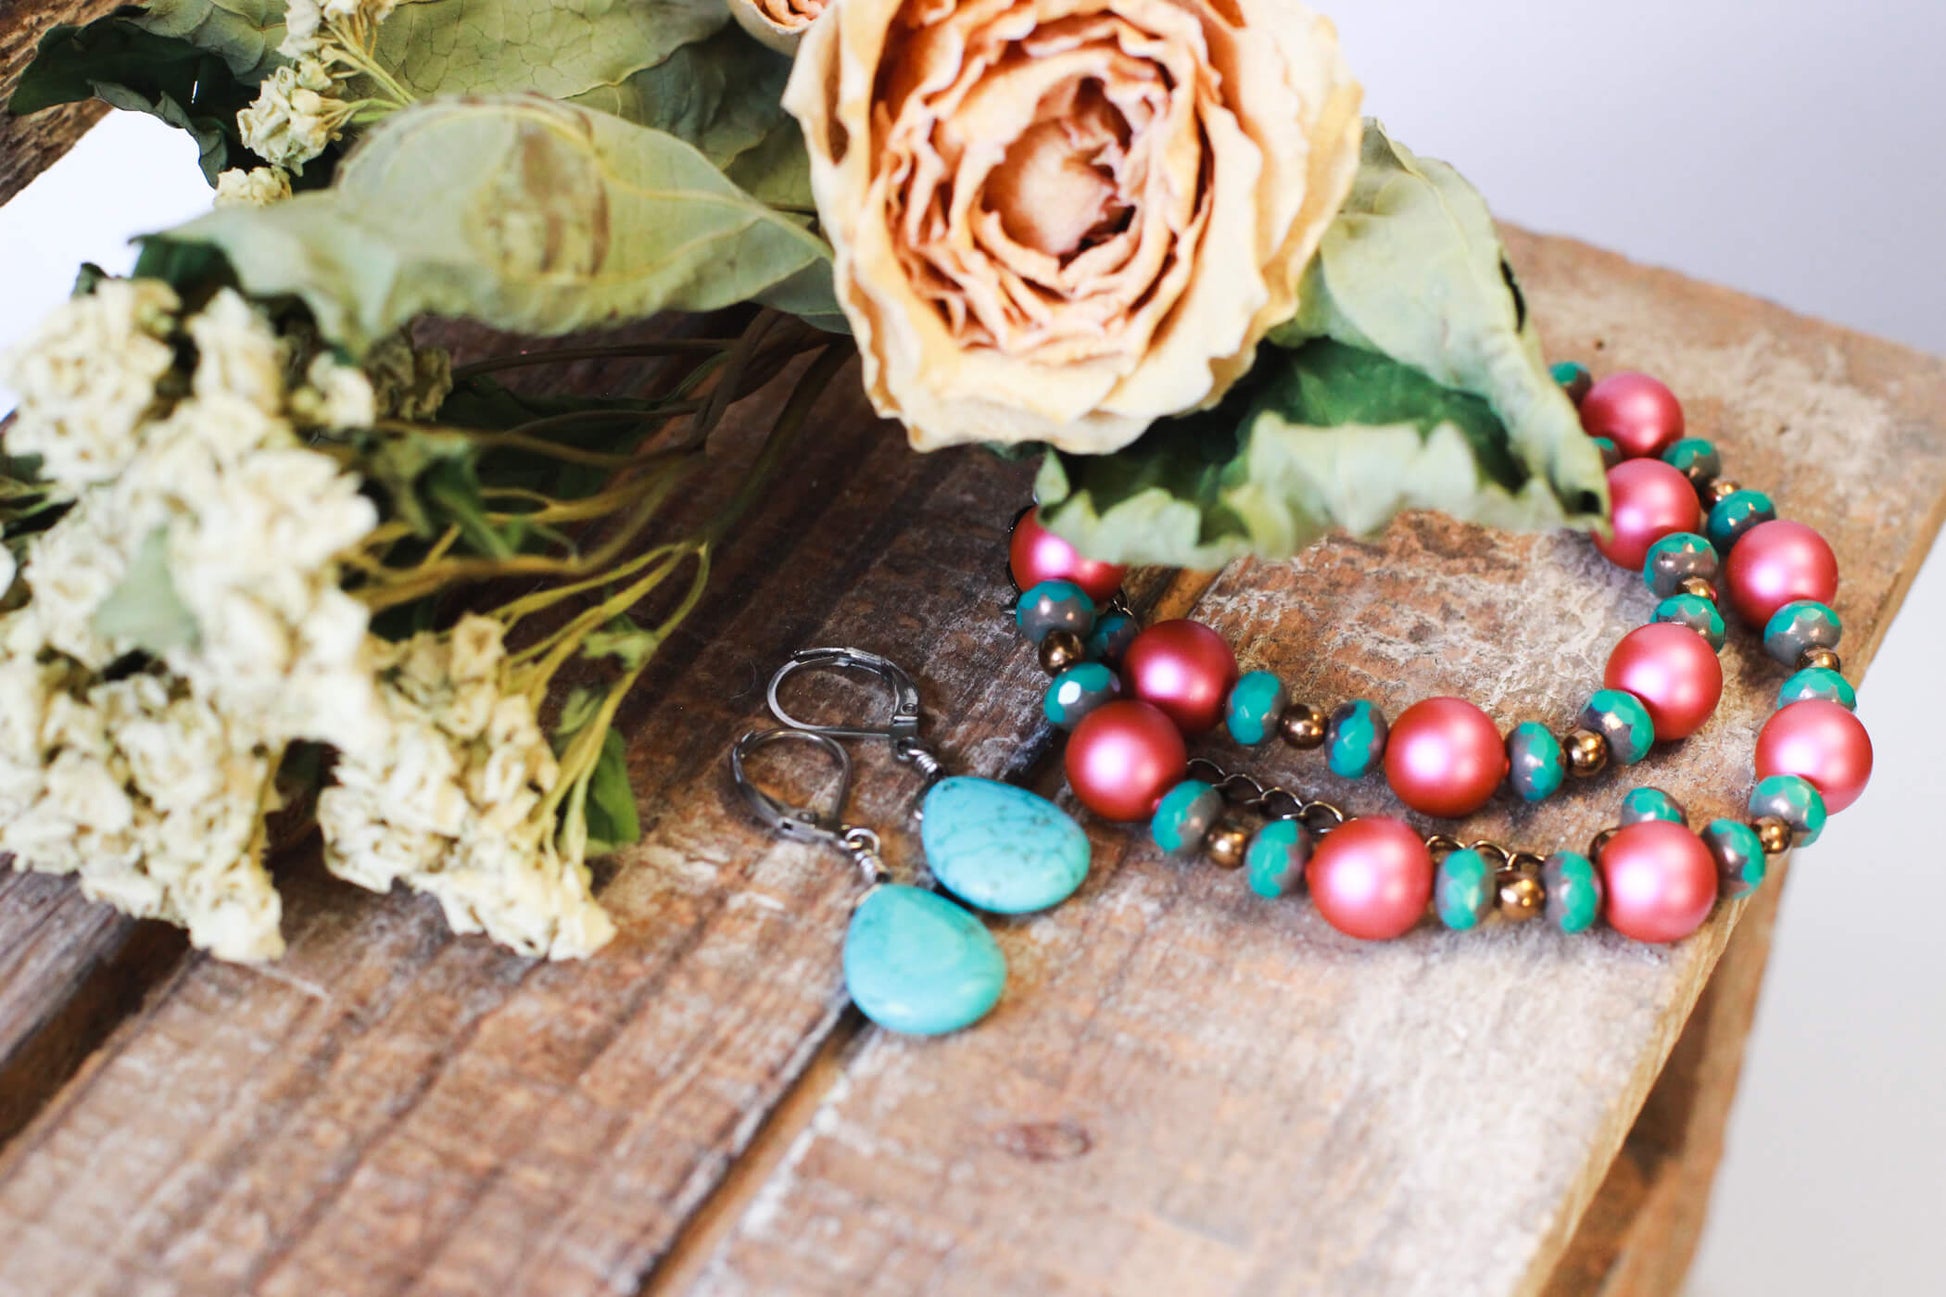 Handmade Vintage-Inspired Jewelry | Mexican-style designer jewelry by Kaleidoscopes And Polka Dots